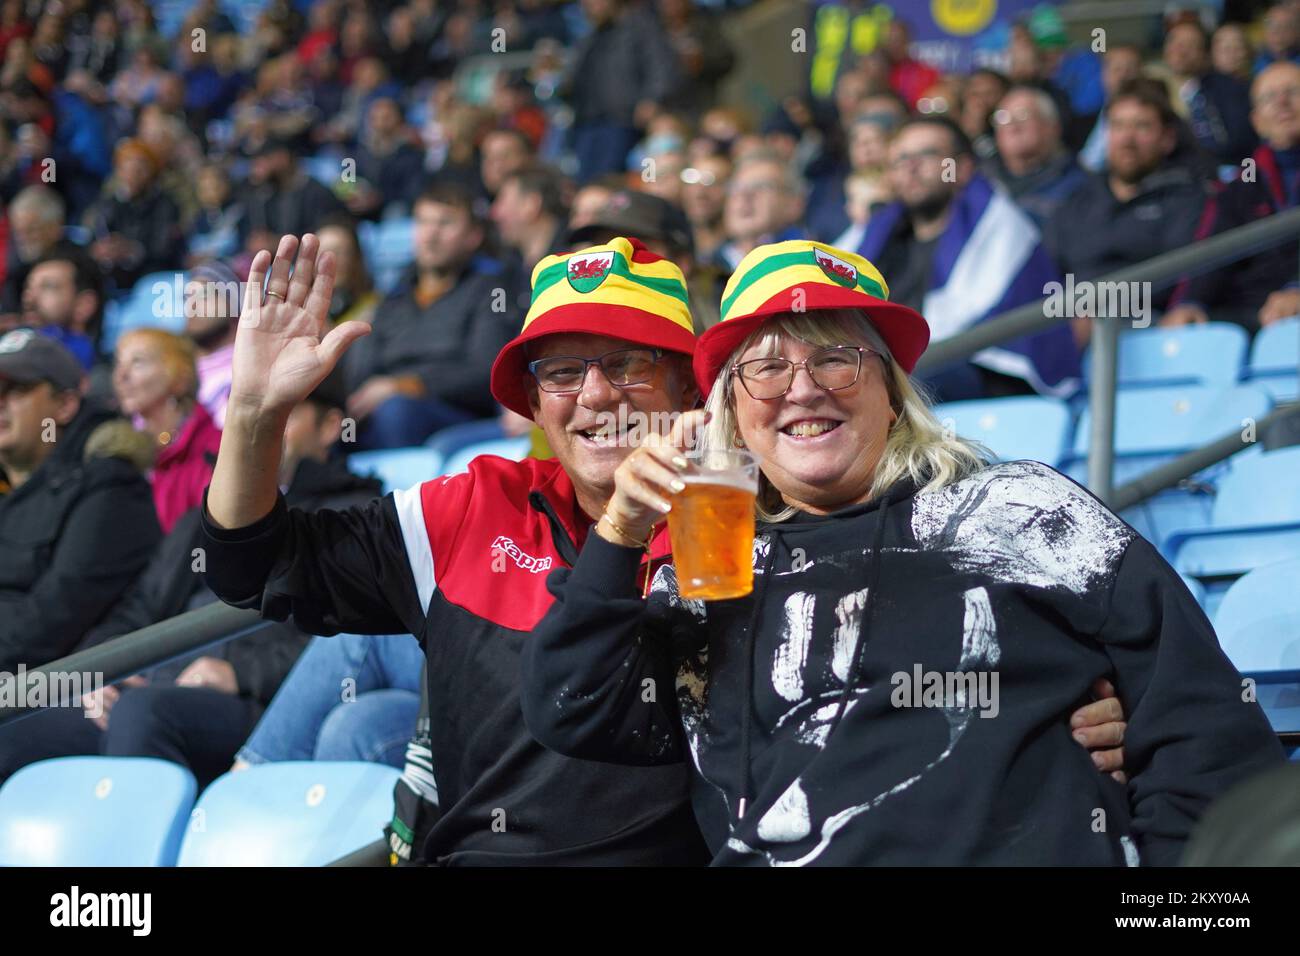 Welsh supporters at Scotland v Australia, Coventry Arena, Rugby League World Cup Stock Photo